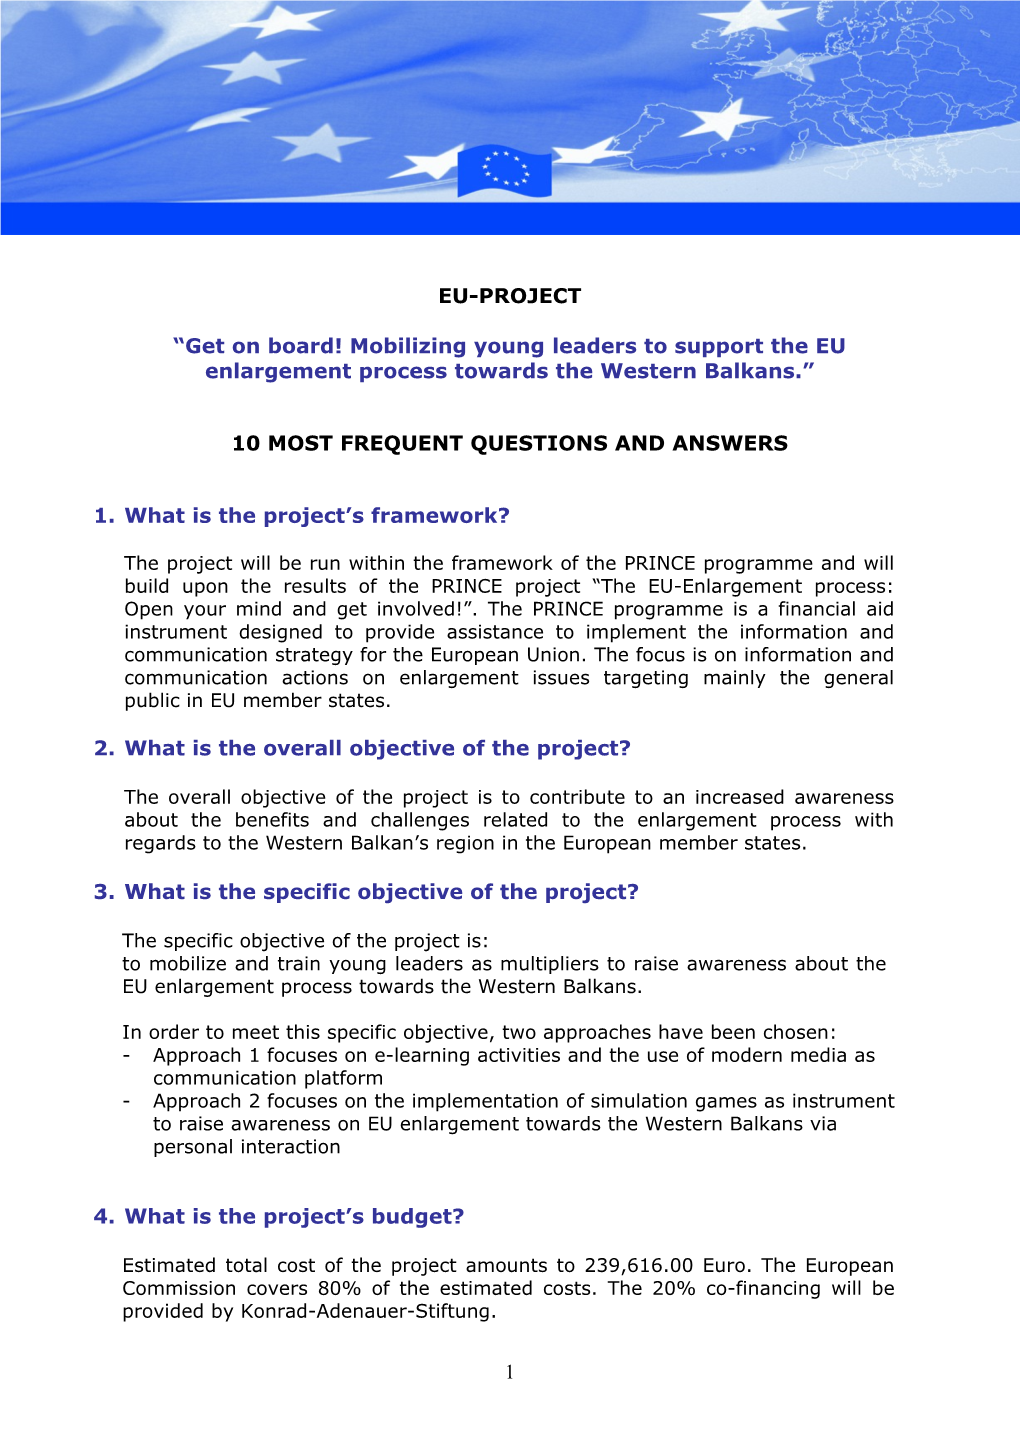 10 Most Frequent Questions and Answers